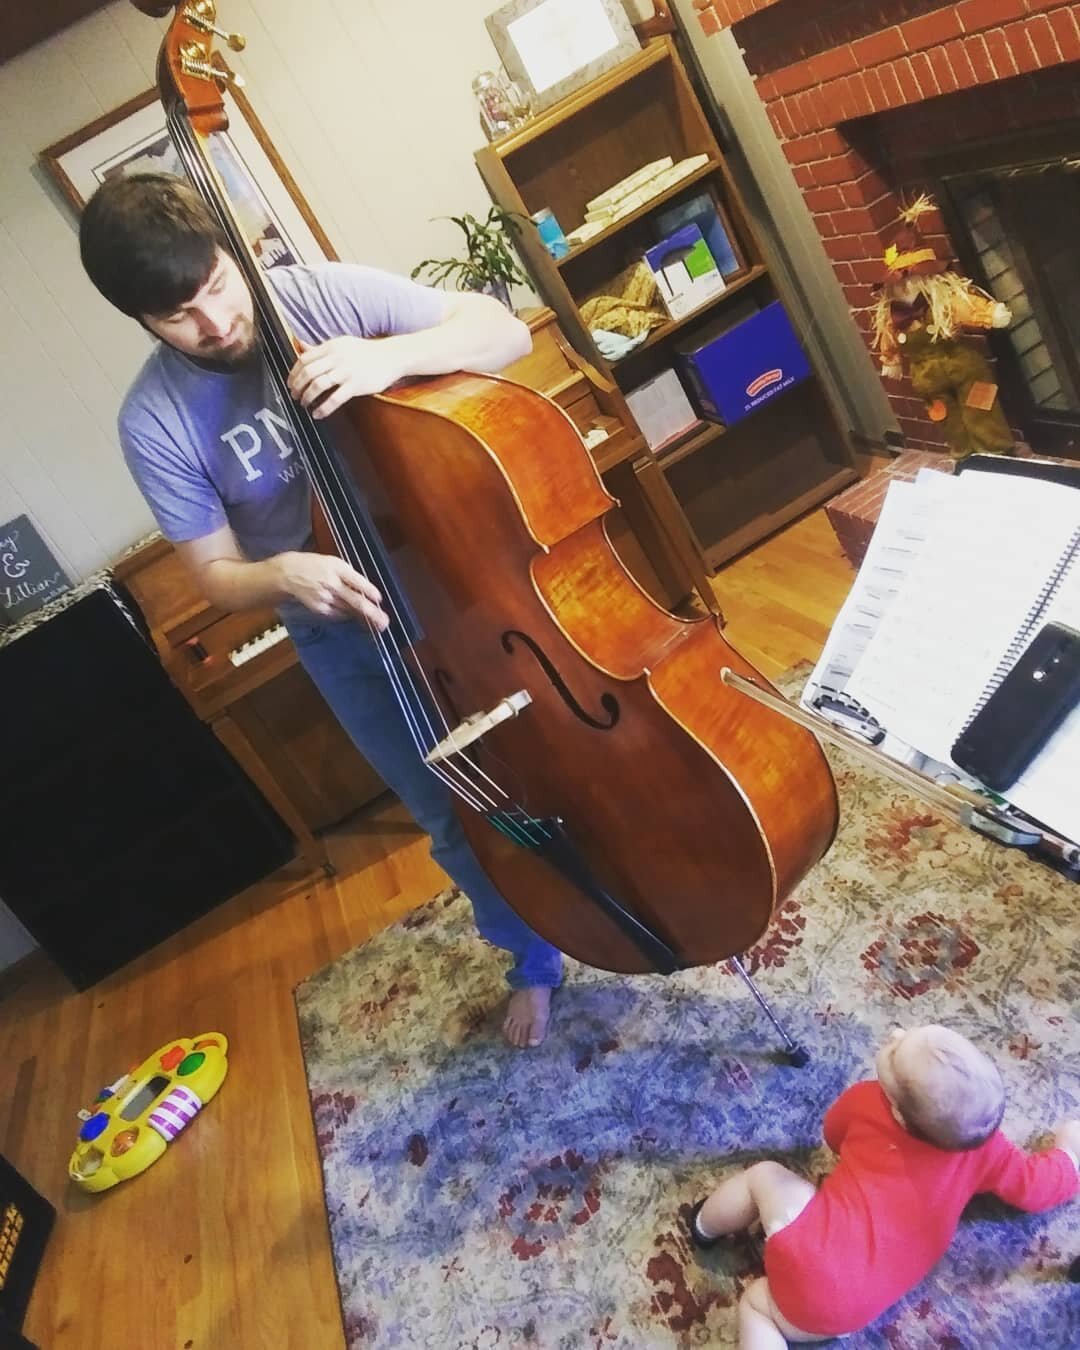 Luca is continuing the Panella baby tradition of crawling up amd playing under my bass while practicing. Alessandra used to do the same at this age! #kcmusic #livejazzkc #bass #bassist #musicianlife #practicing #dadlife